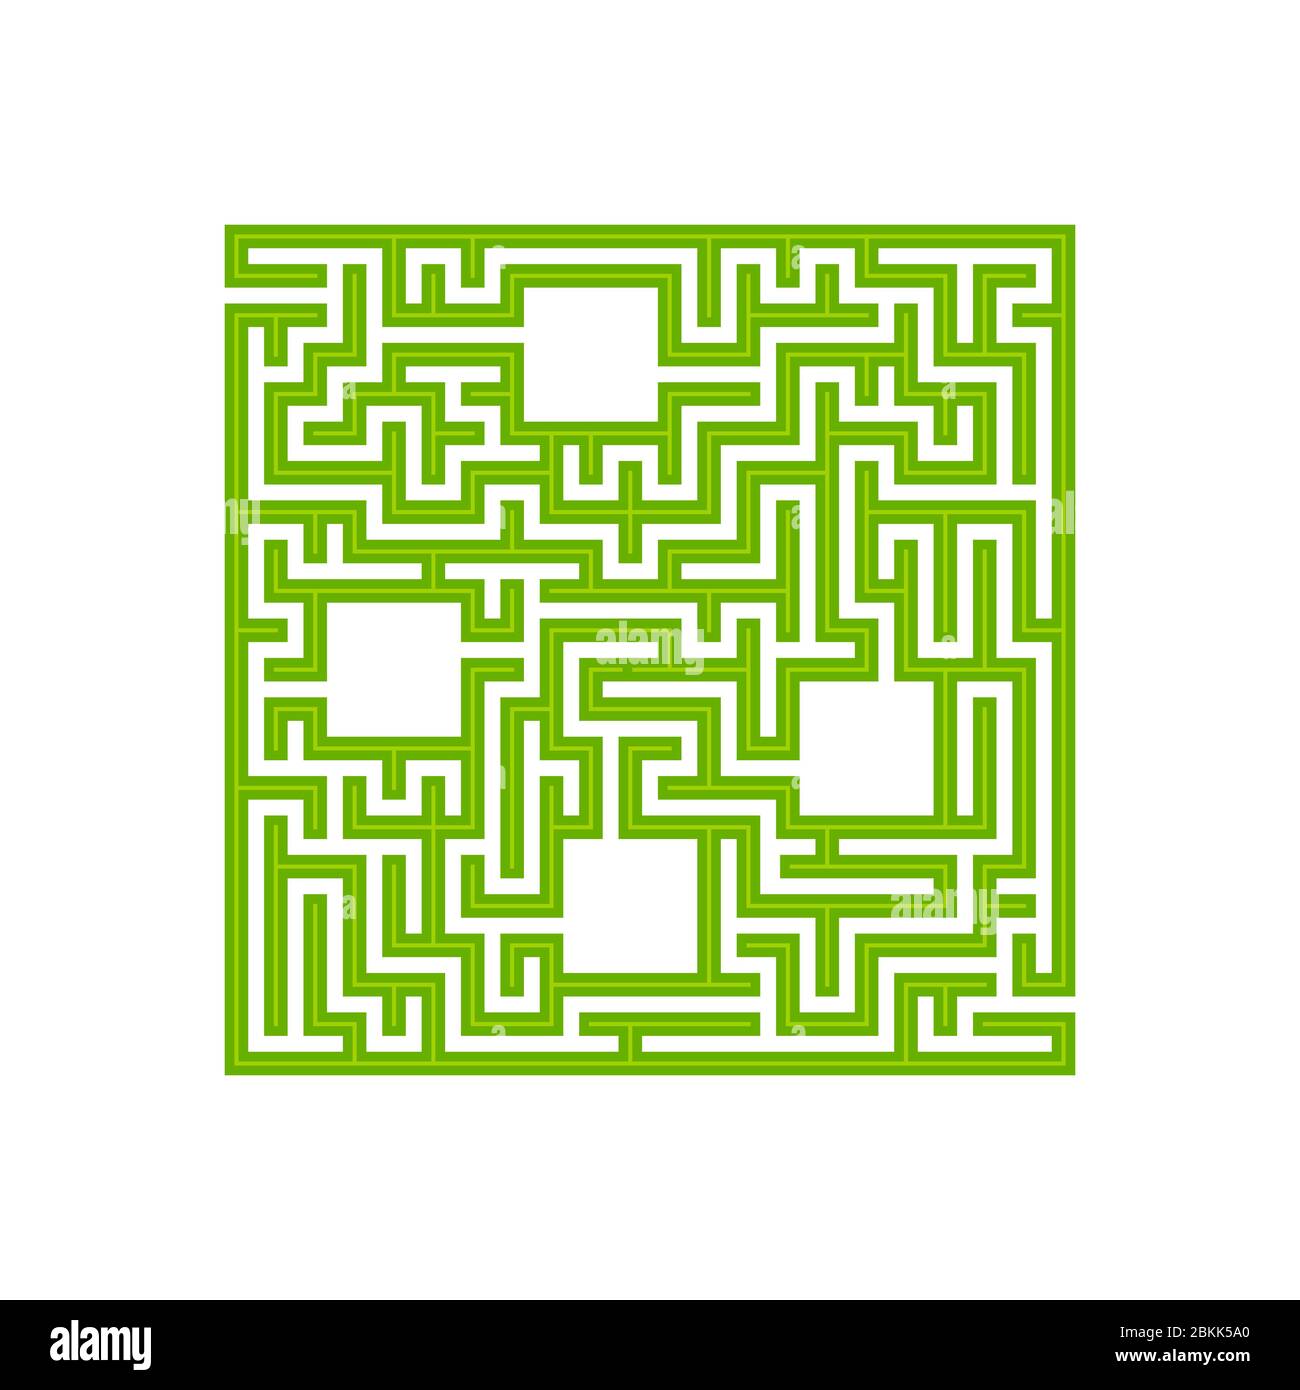 Abstact labyrinth. Game for kids. Puzzle for children. Maze conundrum. Find the right path. Color vector illustration. Stock Vector